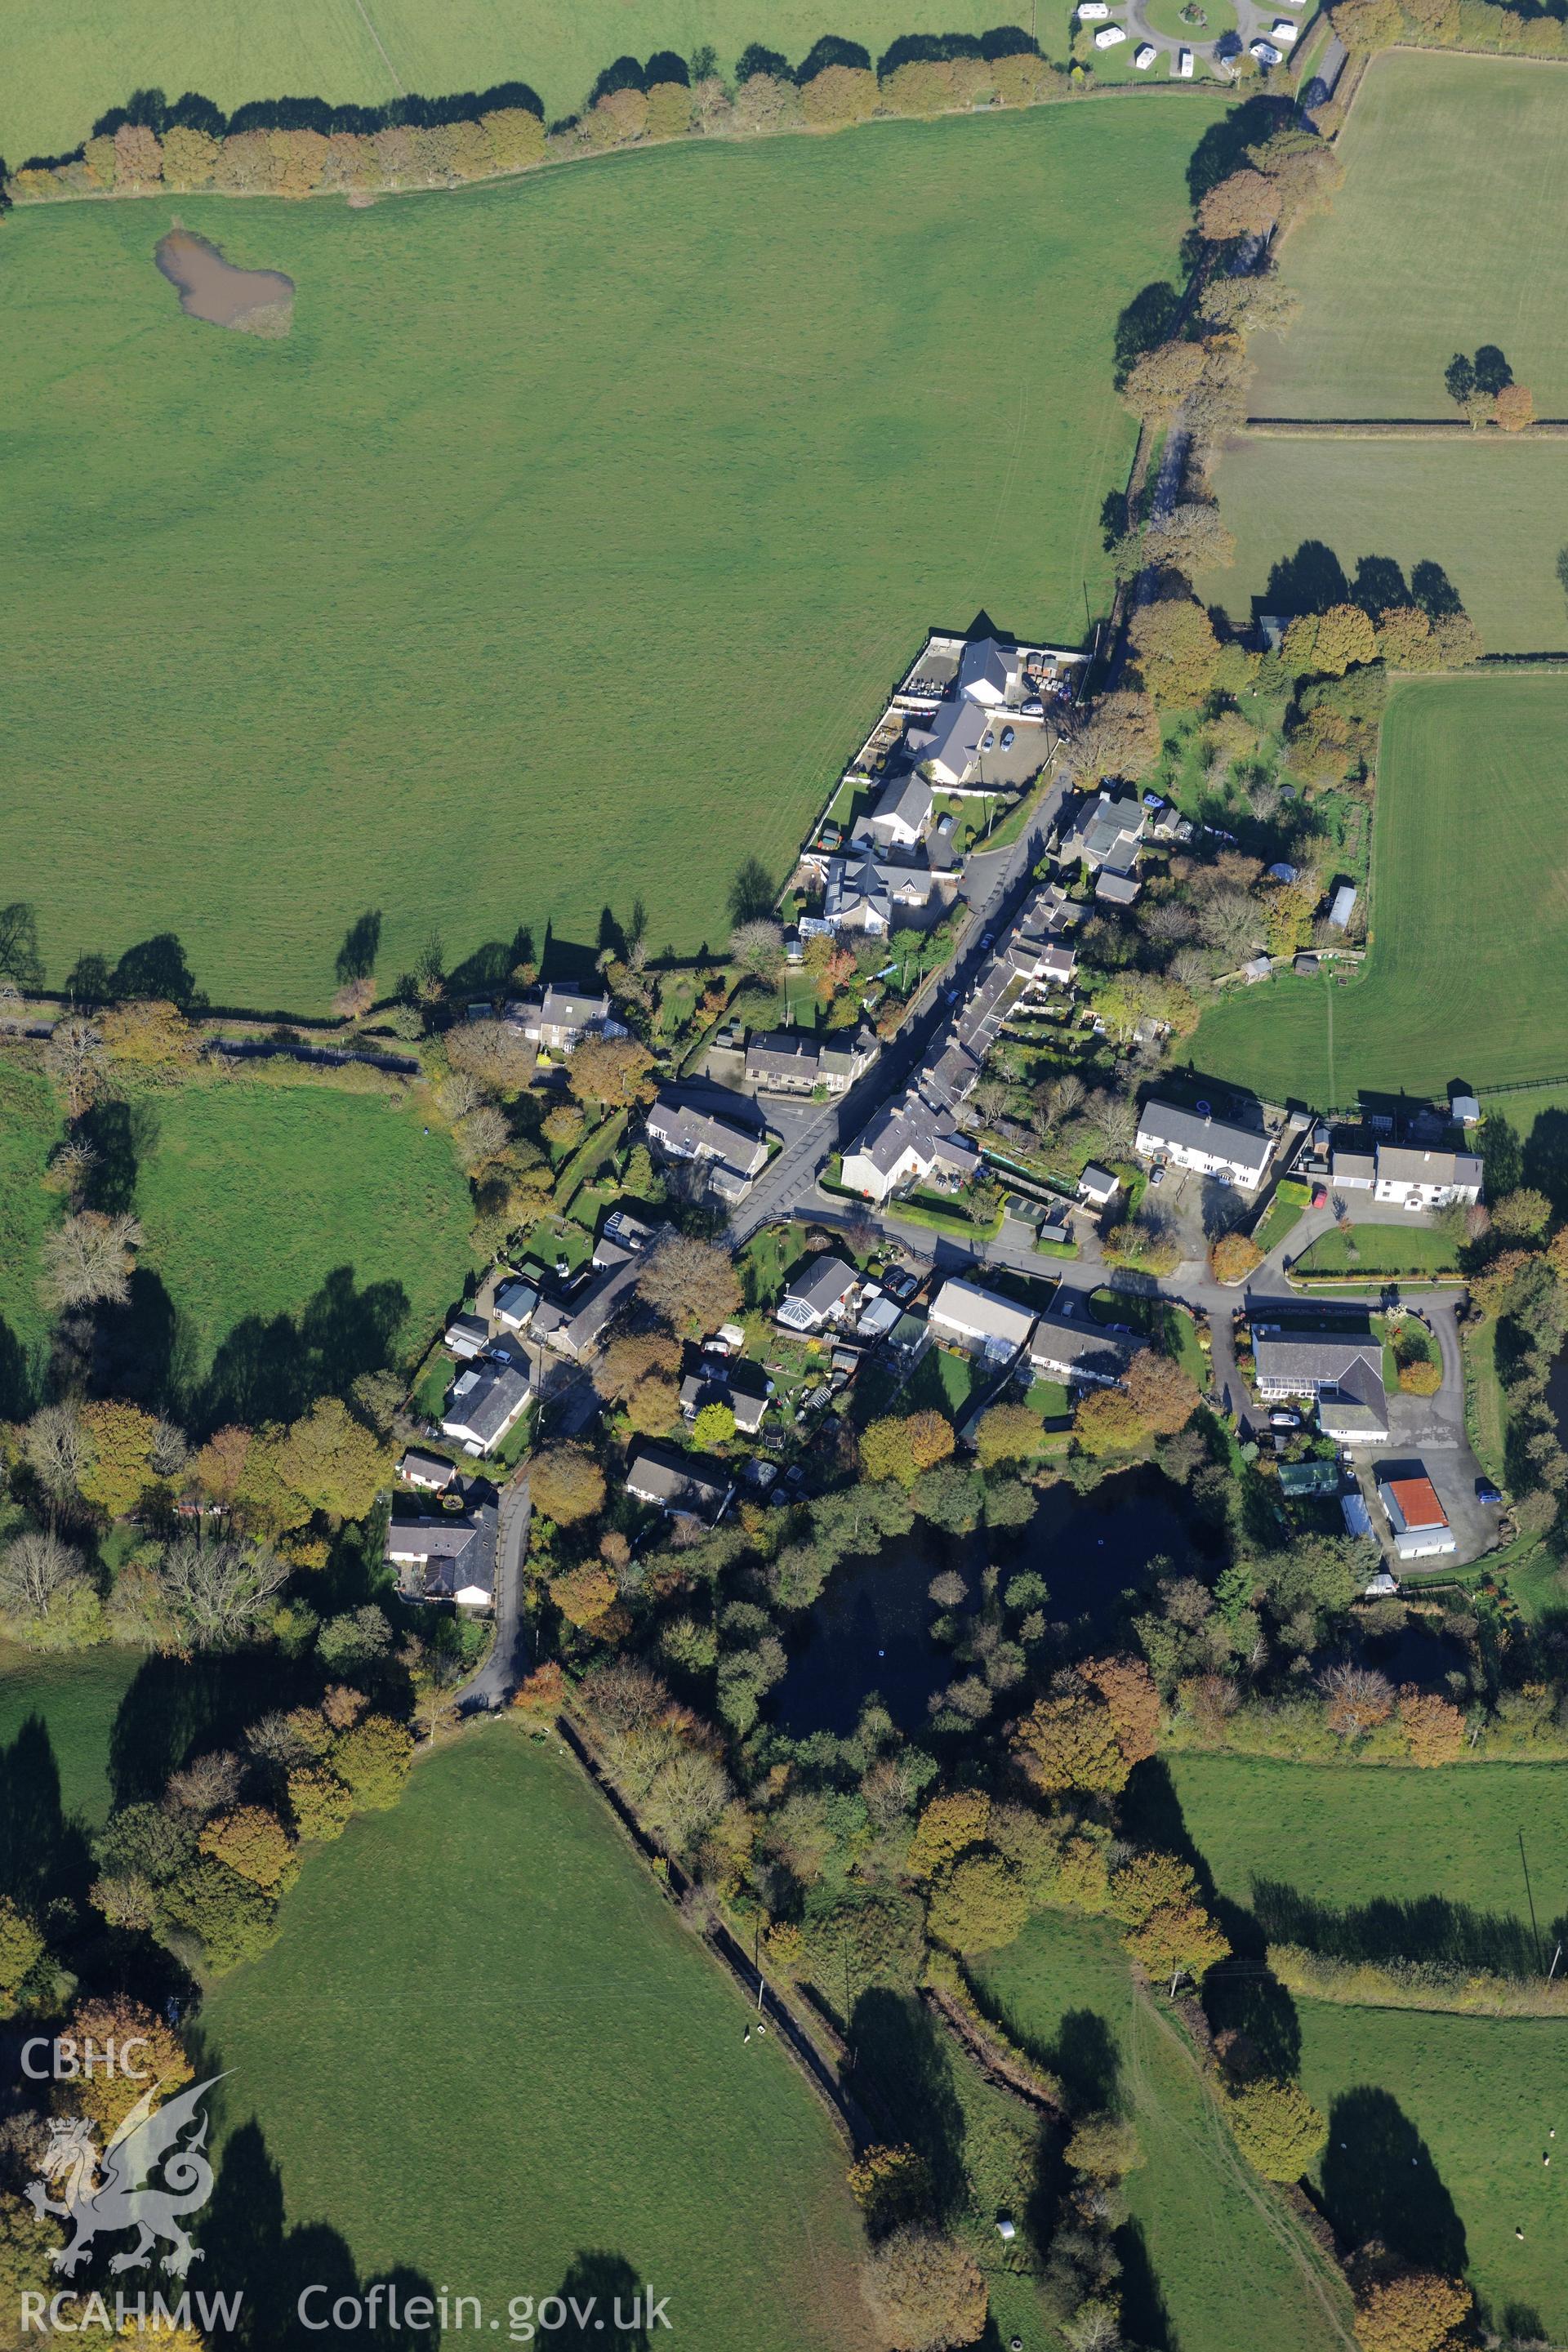 The village of Derwen Gam (Oakford). Oblique aerial photograph taken during the Royal Commission's programme of archaeological aerial reconnaissance by Toby Driver on 2nd November 2015.